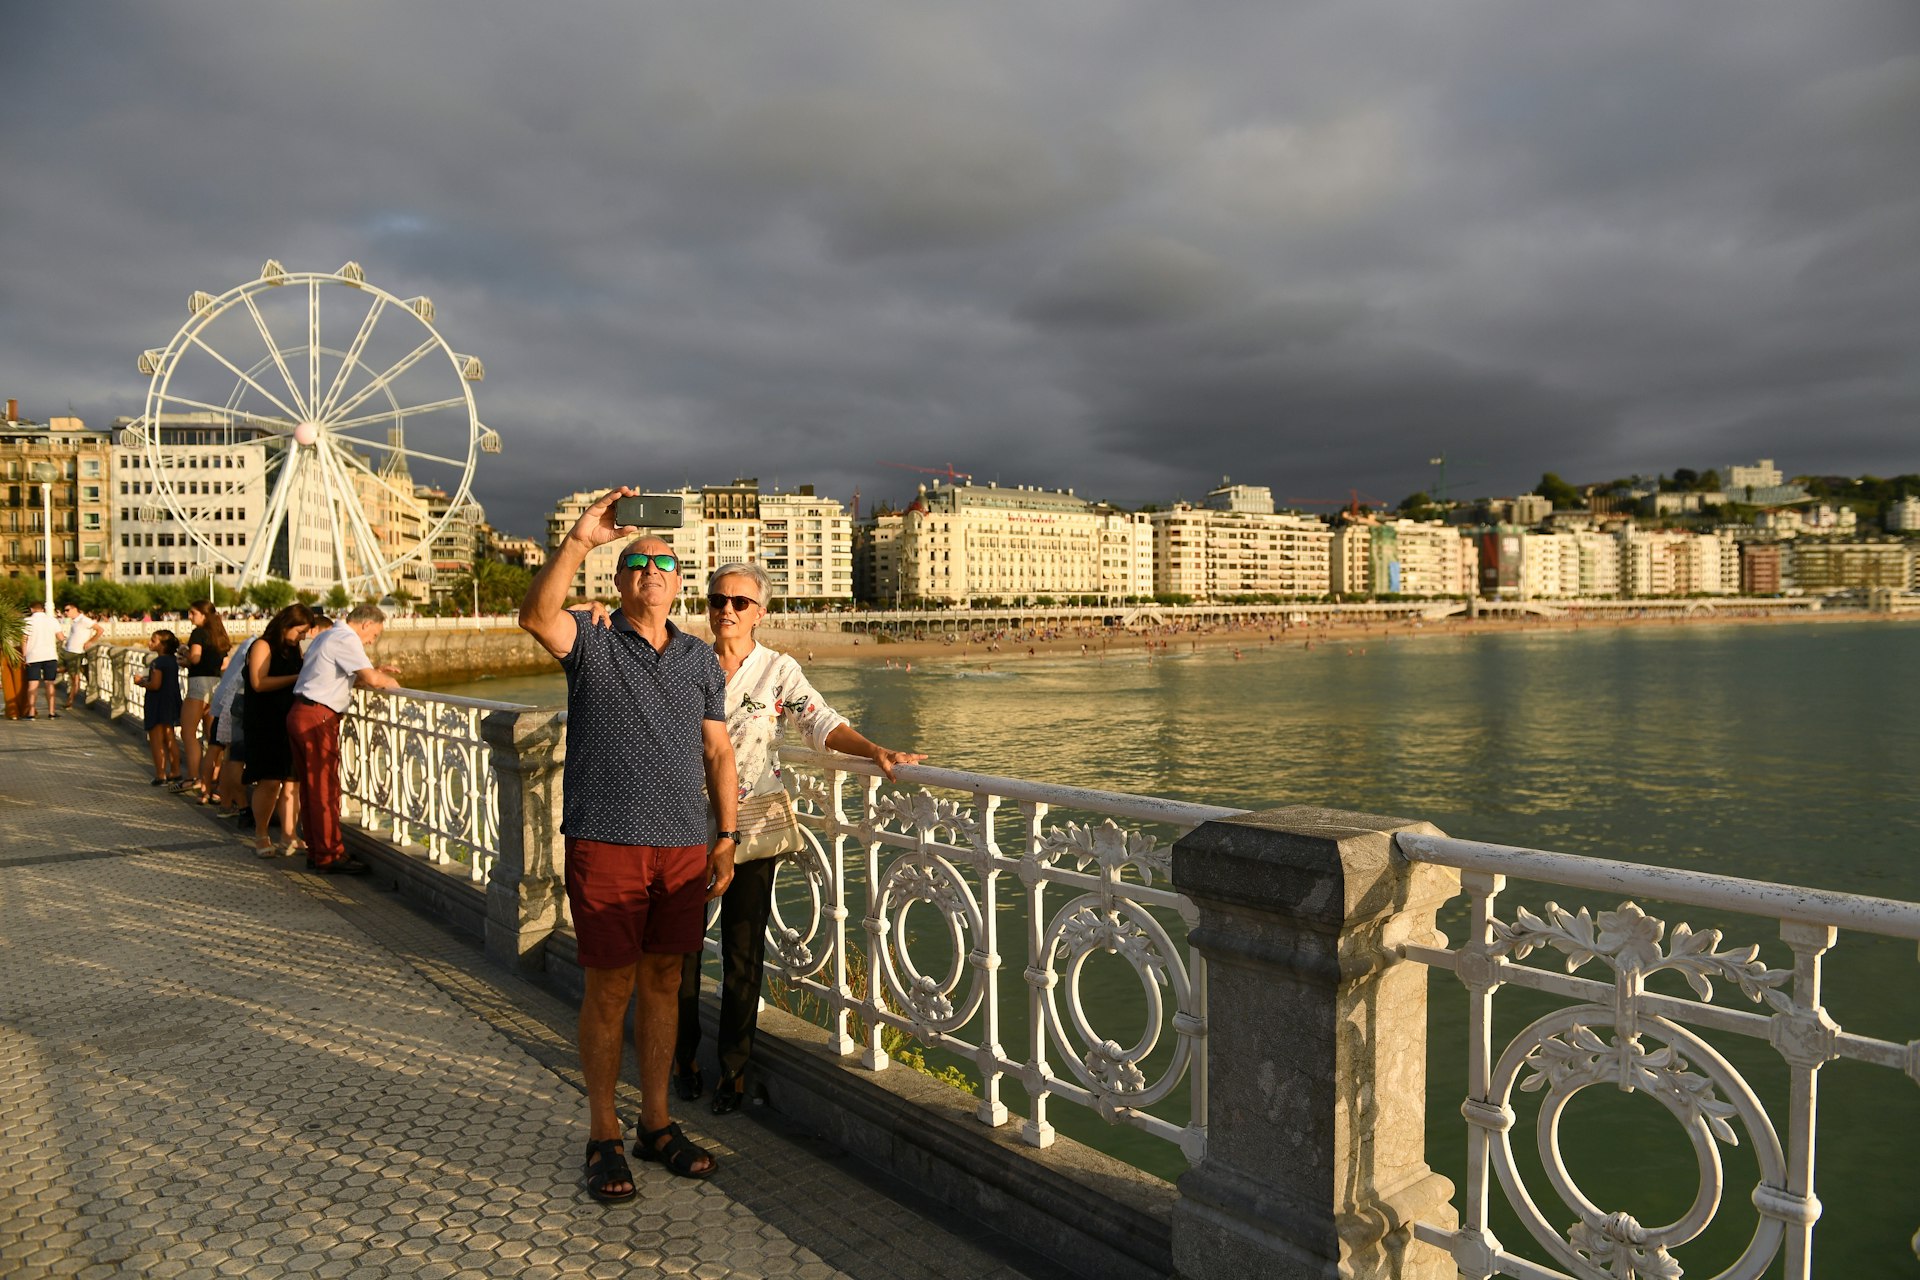 A middle aged tourist couple, the man in a blue button-down and red shorts. the woman in a white blouse and dark slacks, stand by the white metal railing overlooking the ocean on Playa de la Concha. In the background is a long strip of white hotels illuminated by the afternoon sun cutting through dark grey clouds. A ferris wheel appears on the left side of the frame. 